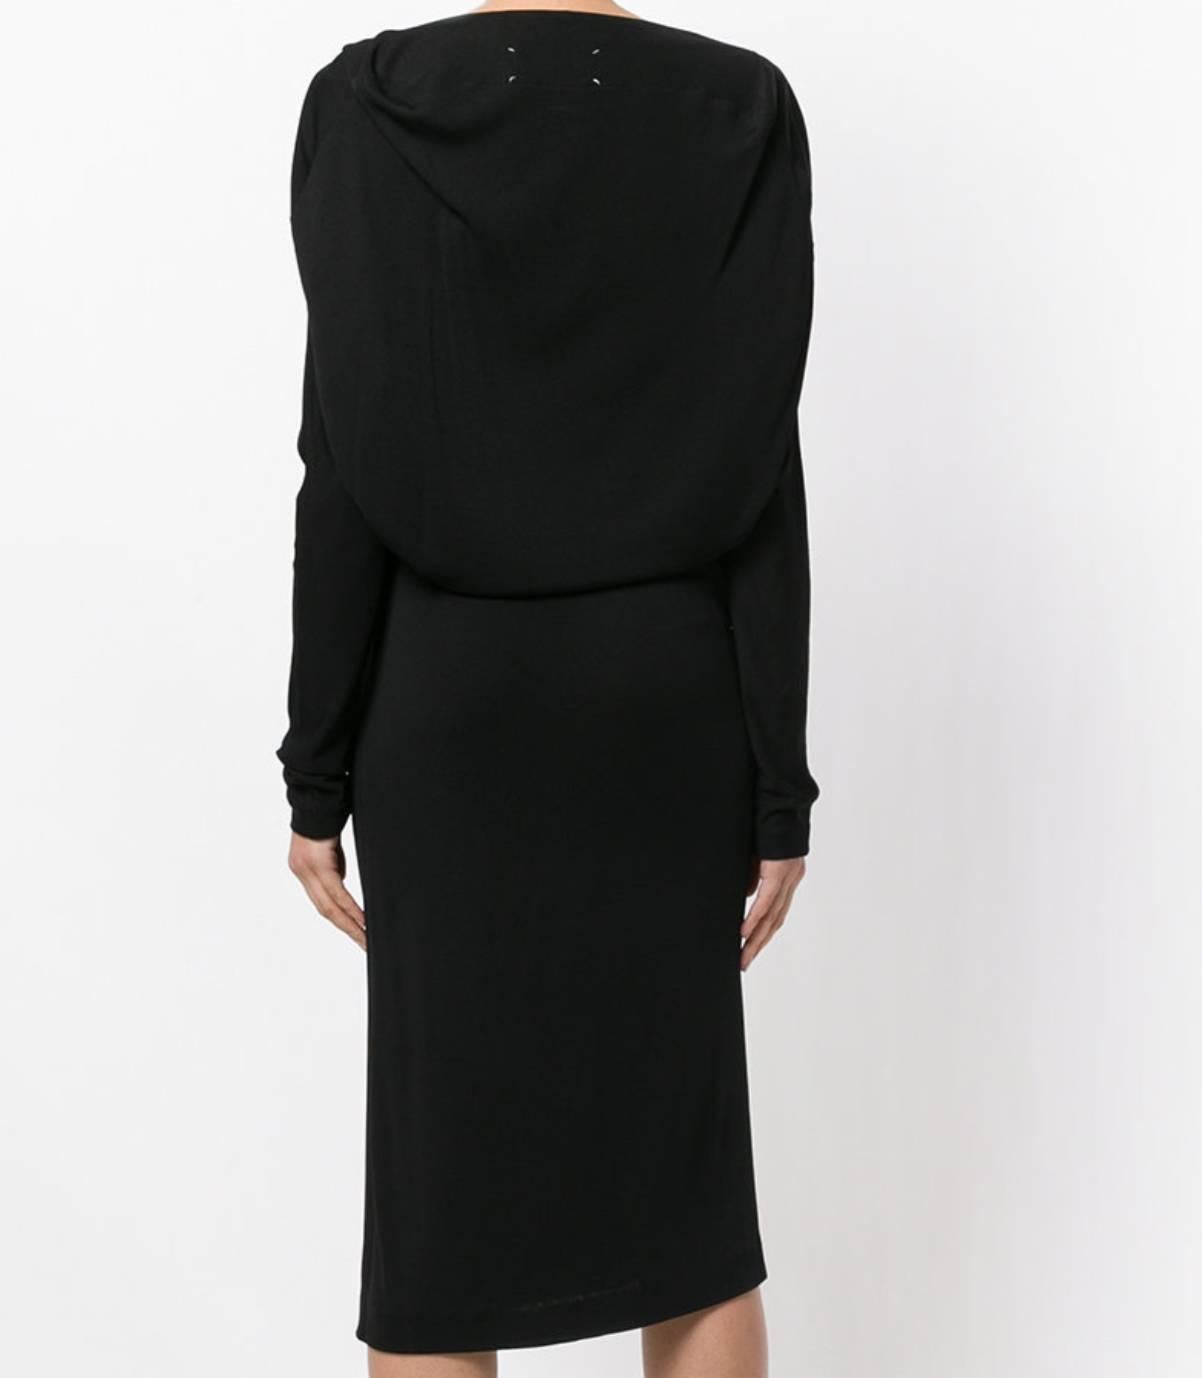 Black raw seam dress from Maison Martin Margiela featuring a boat neck, long sleeves, an over-the-knee length and a draped back. size 42 IT .
Made in Italy,
Composition
Viscose 100%
Washing Instructions:
Dry Clean Only